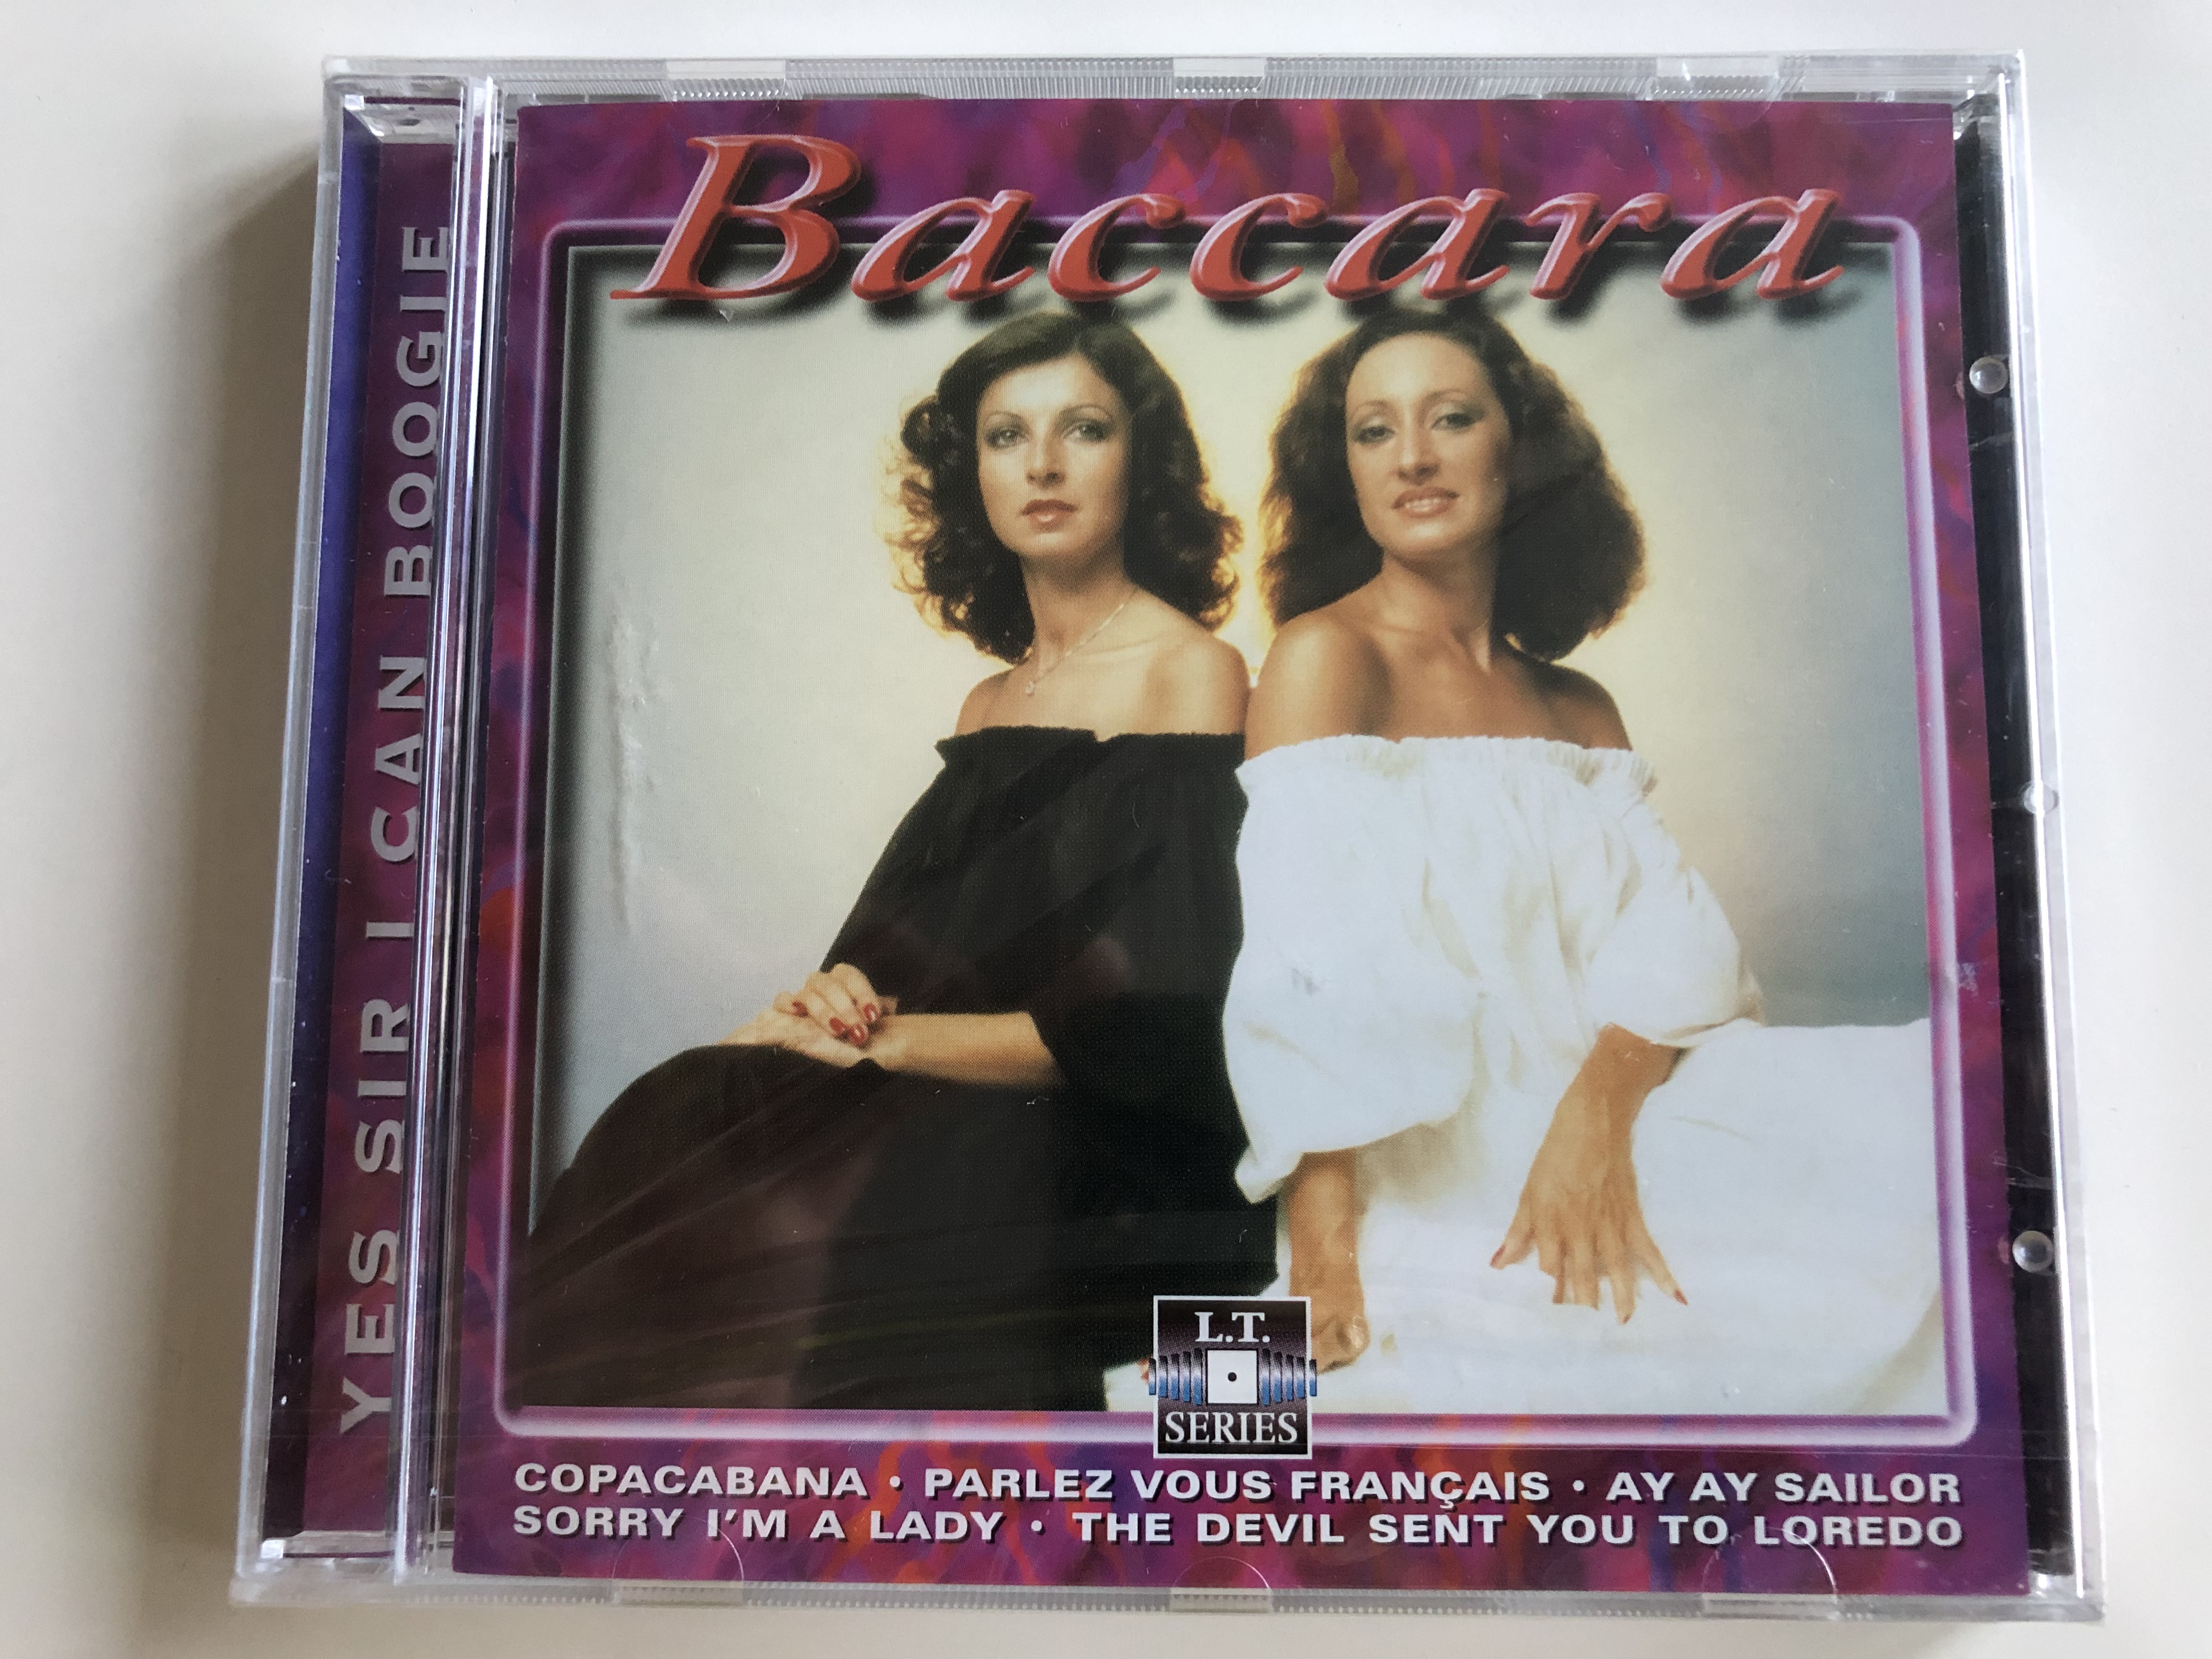 baccara-yes-sir-i-can-boogie-audio-cd-1999-l.t.-series-lt-5114-1-.jpg